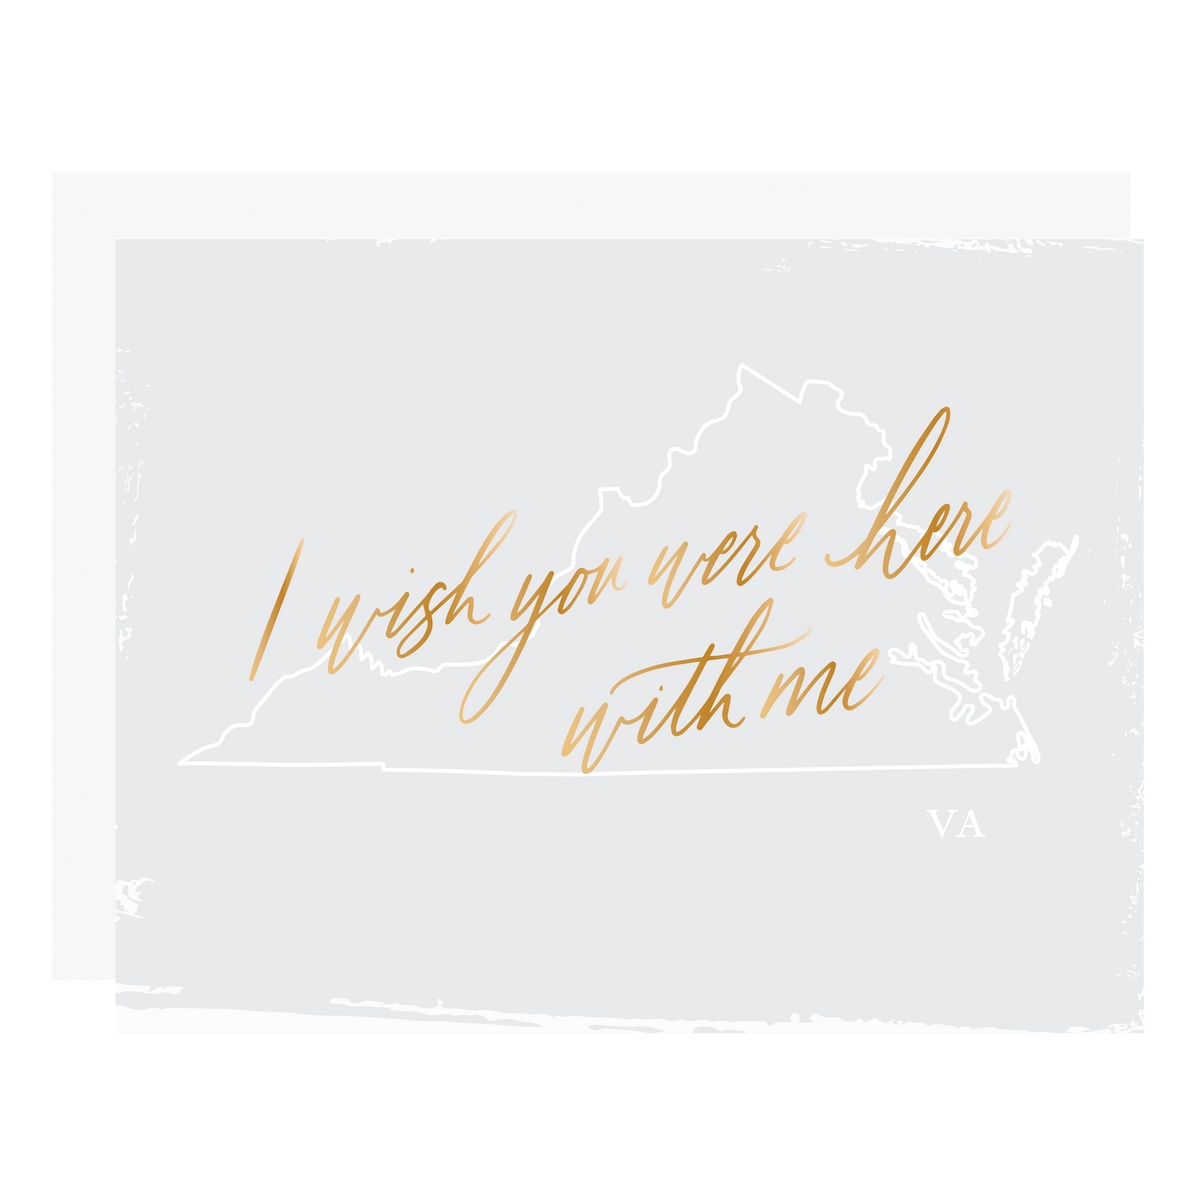 &quot;Wish You Were Here With Me - Virginia&quot;, letterpress printed by hand with gold foil. 